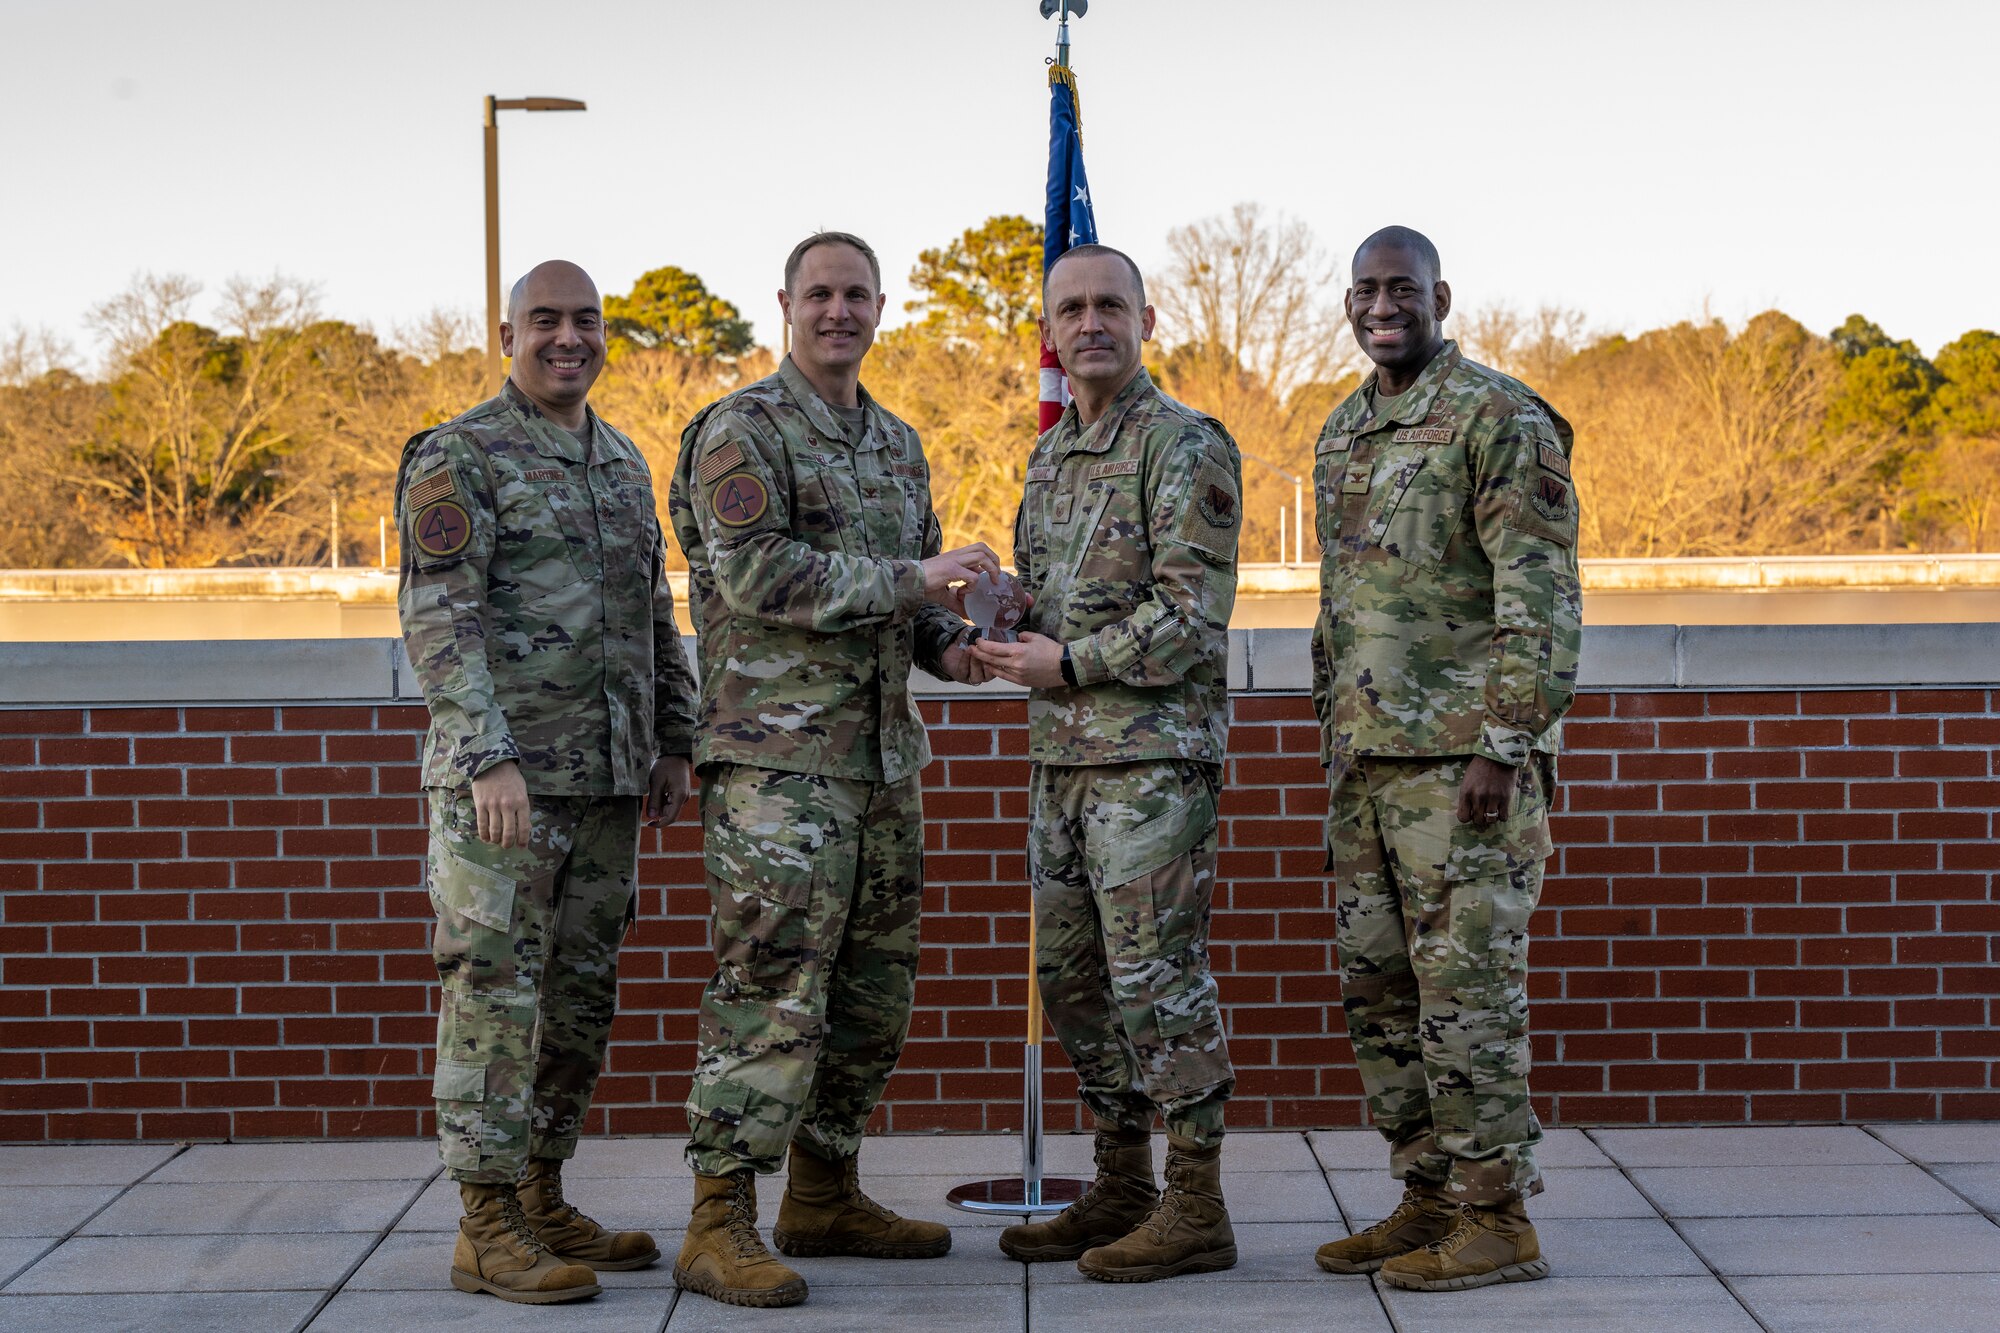 Trumic was awarded the Air Force Medical Service Award for Air Combat Command’s 2022 Medical Service Senior Non-Commissioned Officer Leadership Award